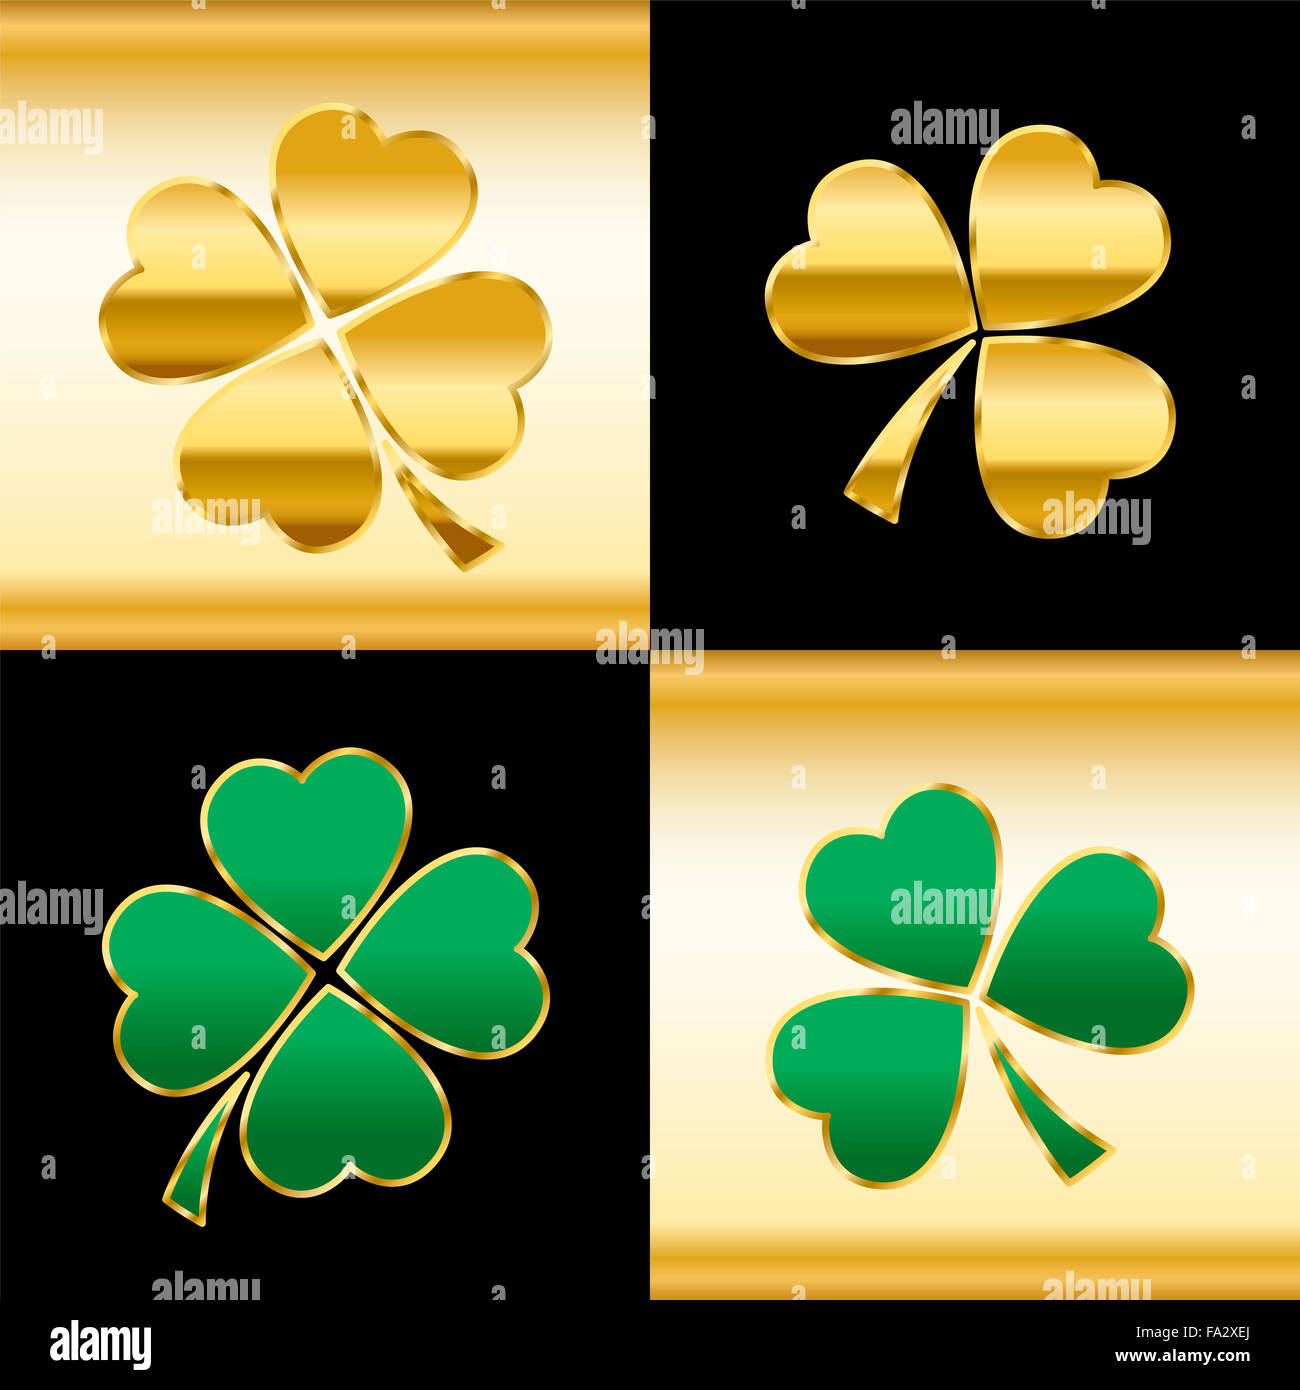 Golden and green shamrocks - pattern with three and four leaved clovers on gold and black square background. Stock Photo